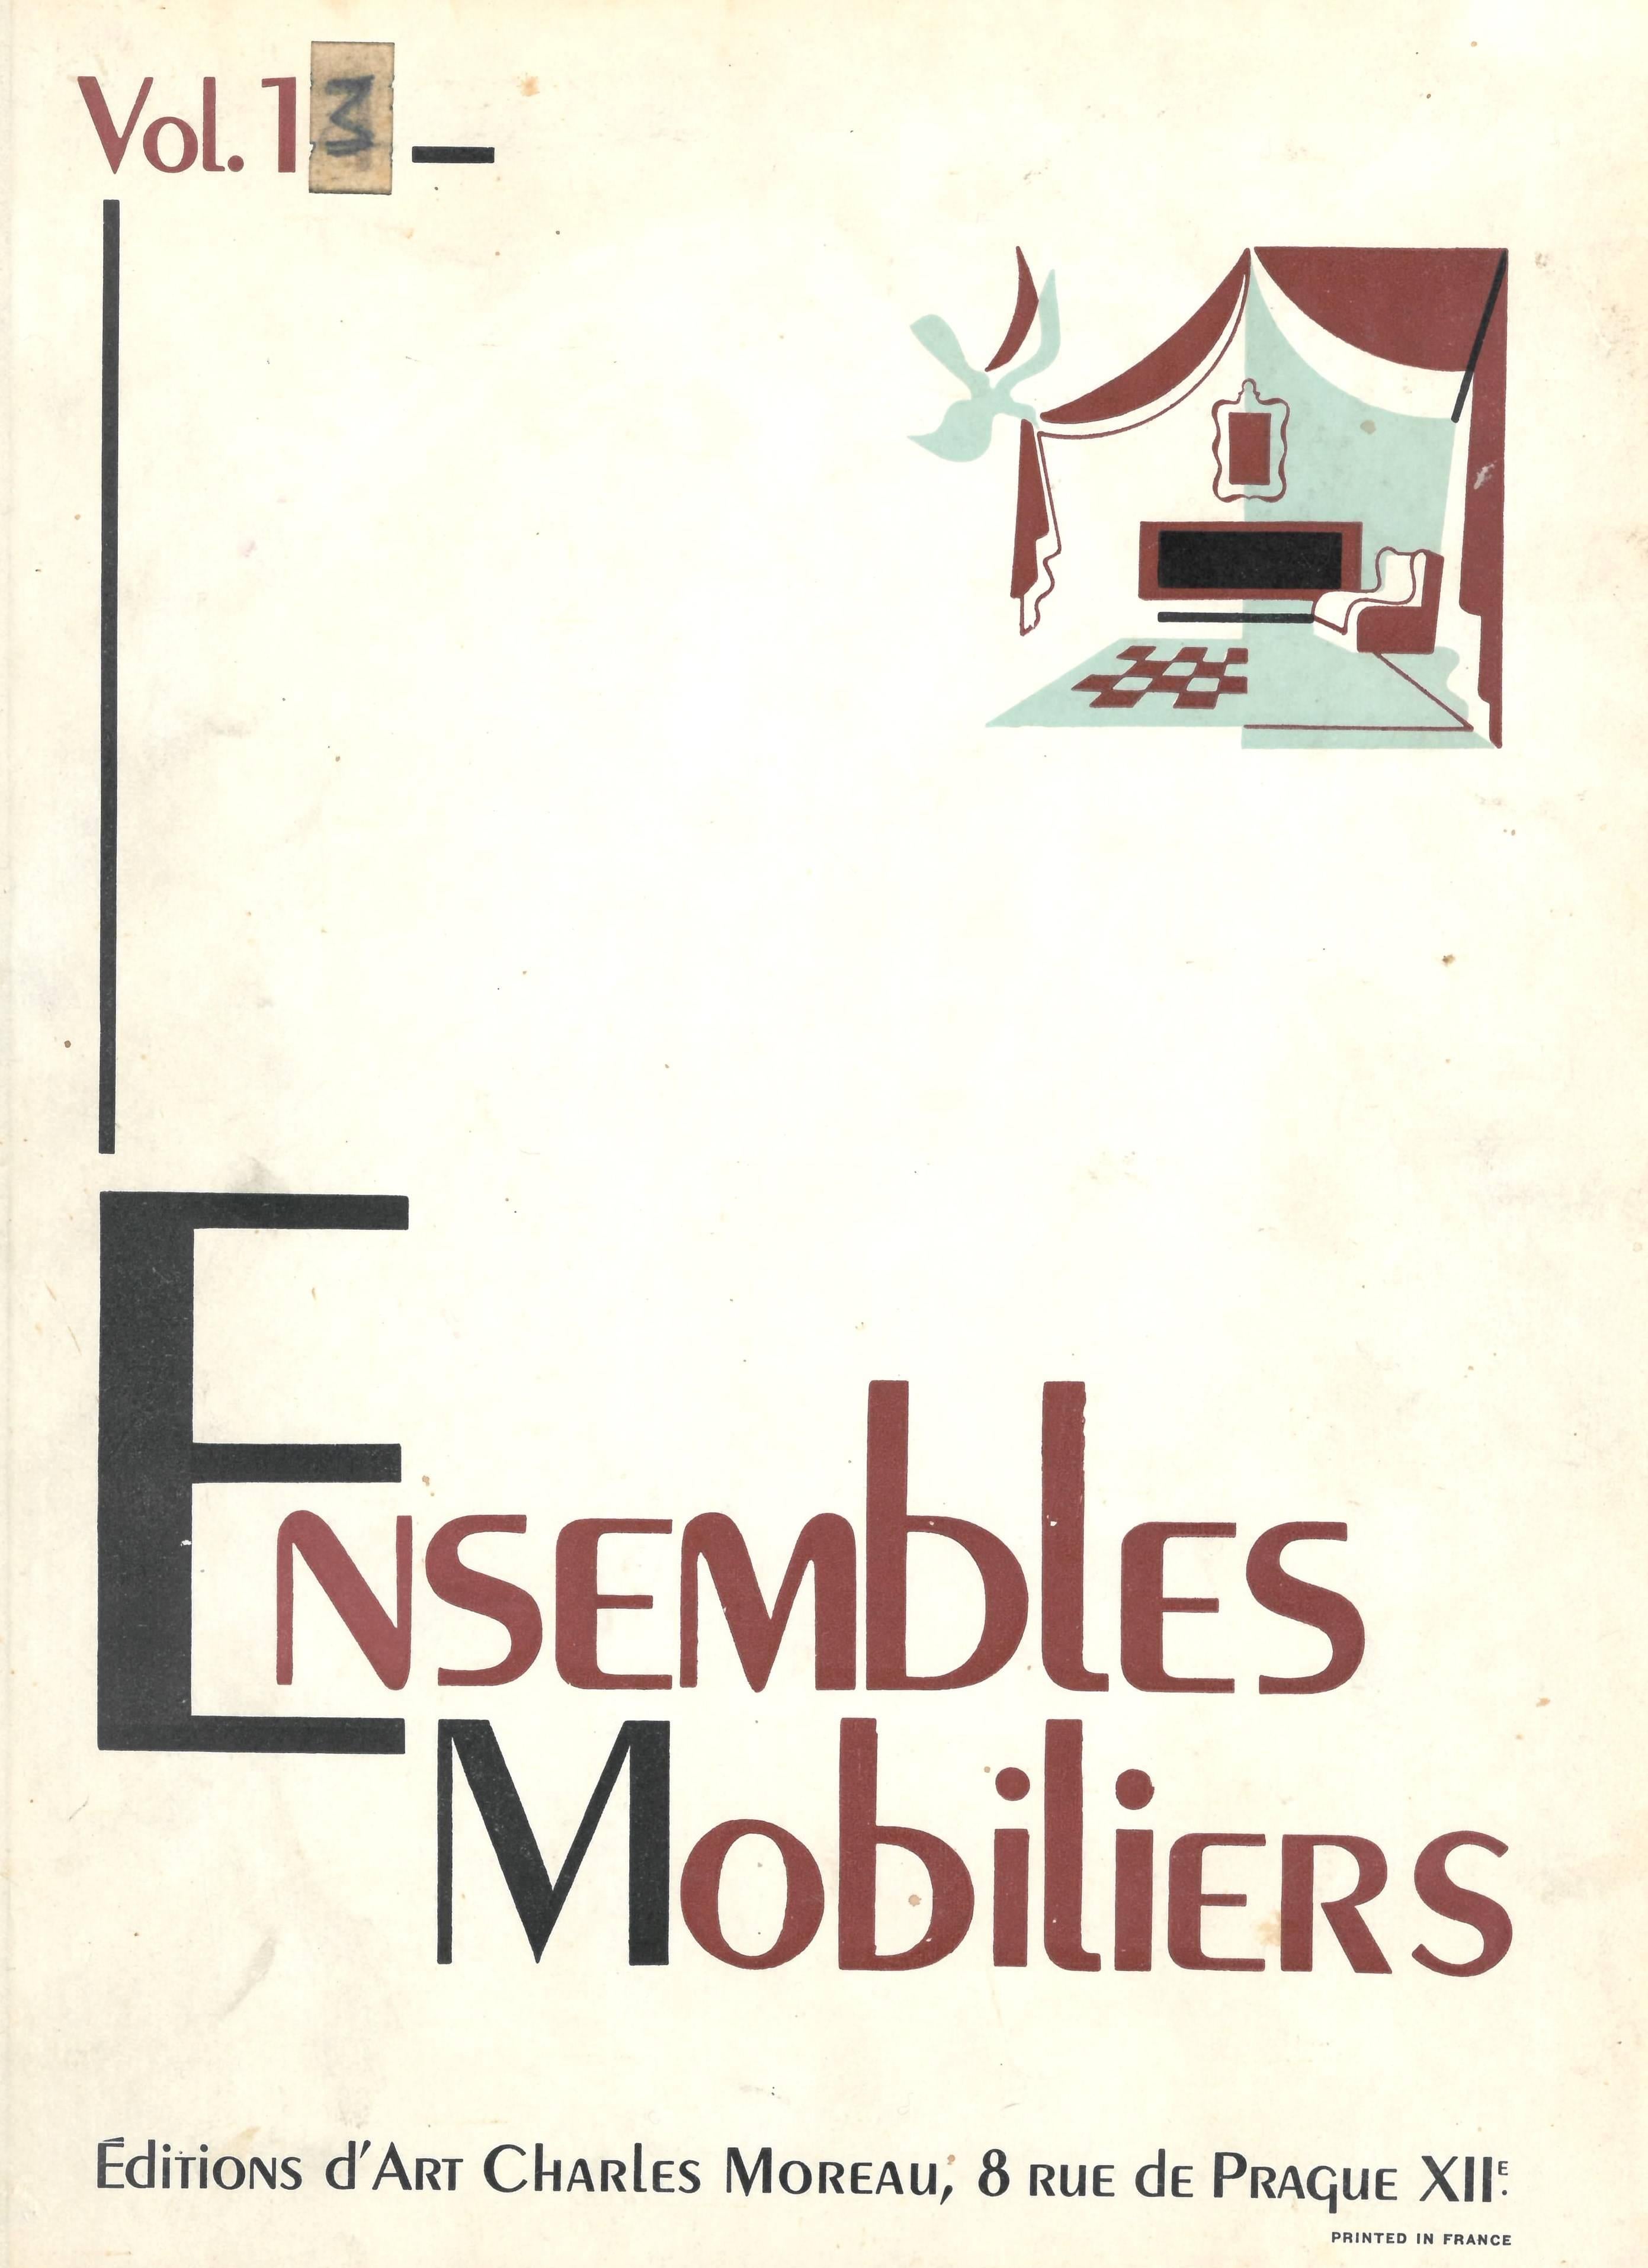 This is a six folio volume run of the Ensembles Mobiliers series published by Editions Charles Moreau in the 1950s, each volume is complete and the plates are in good condition. The only slight anomoly is that the numbers on the folio front covers